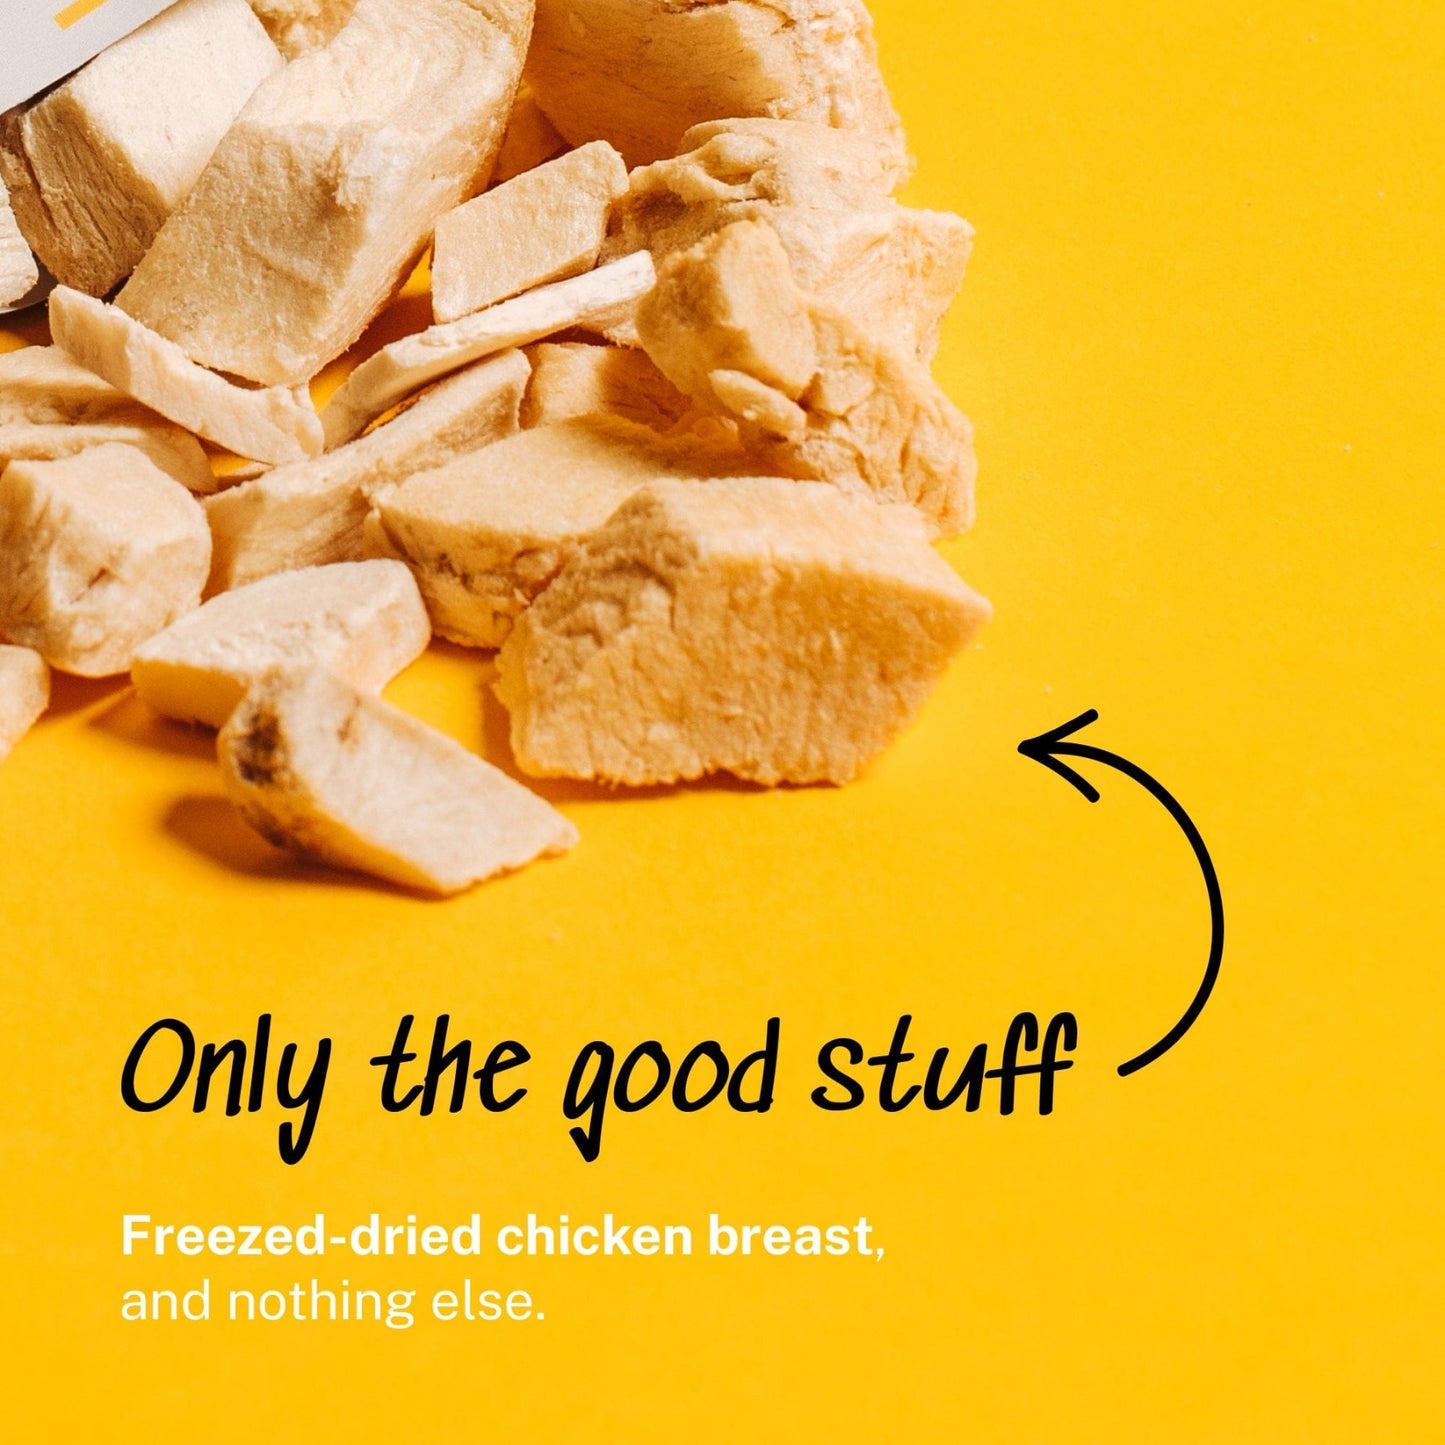 Only the good stuff - freeze-dried chicken breast and nothing else.